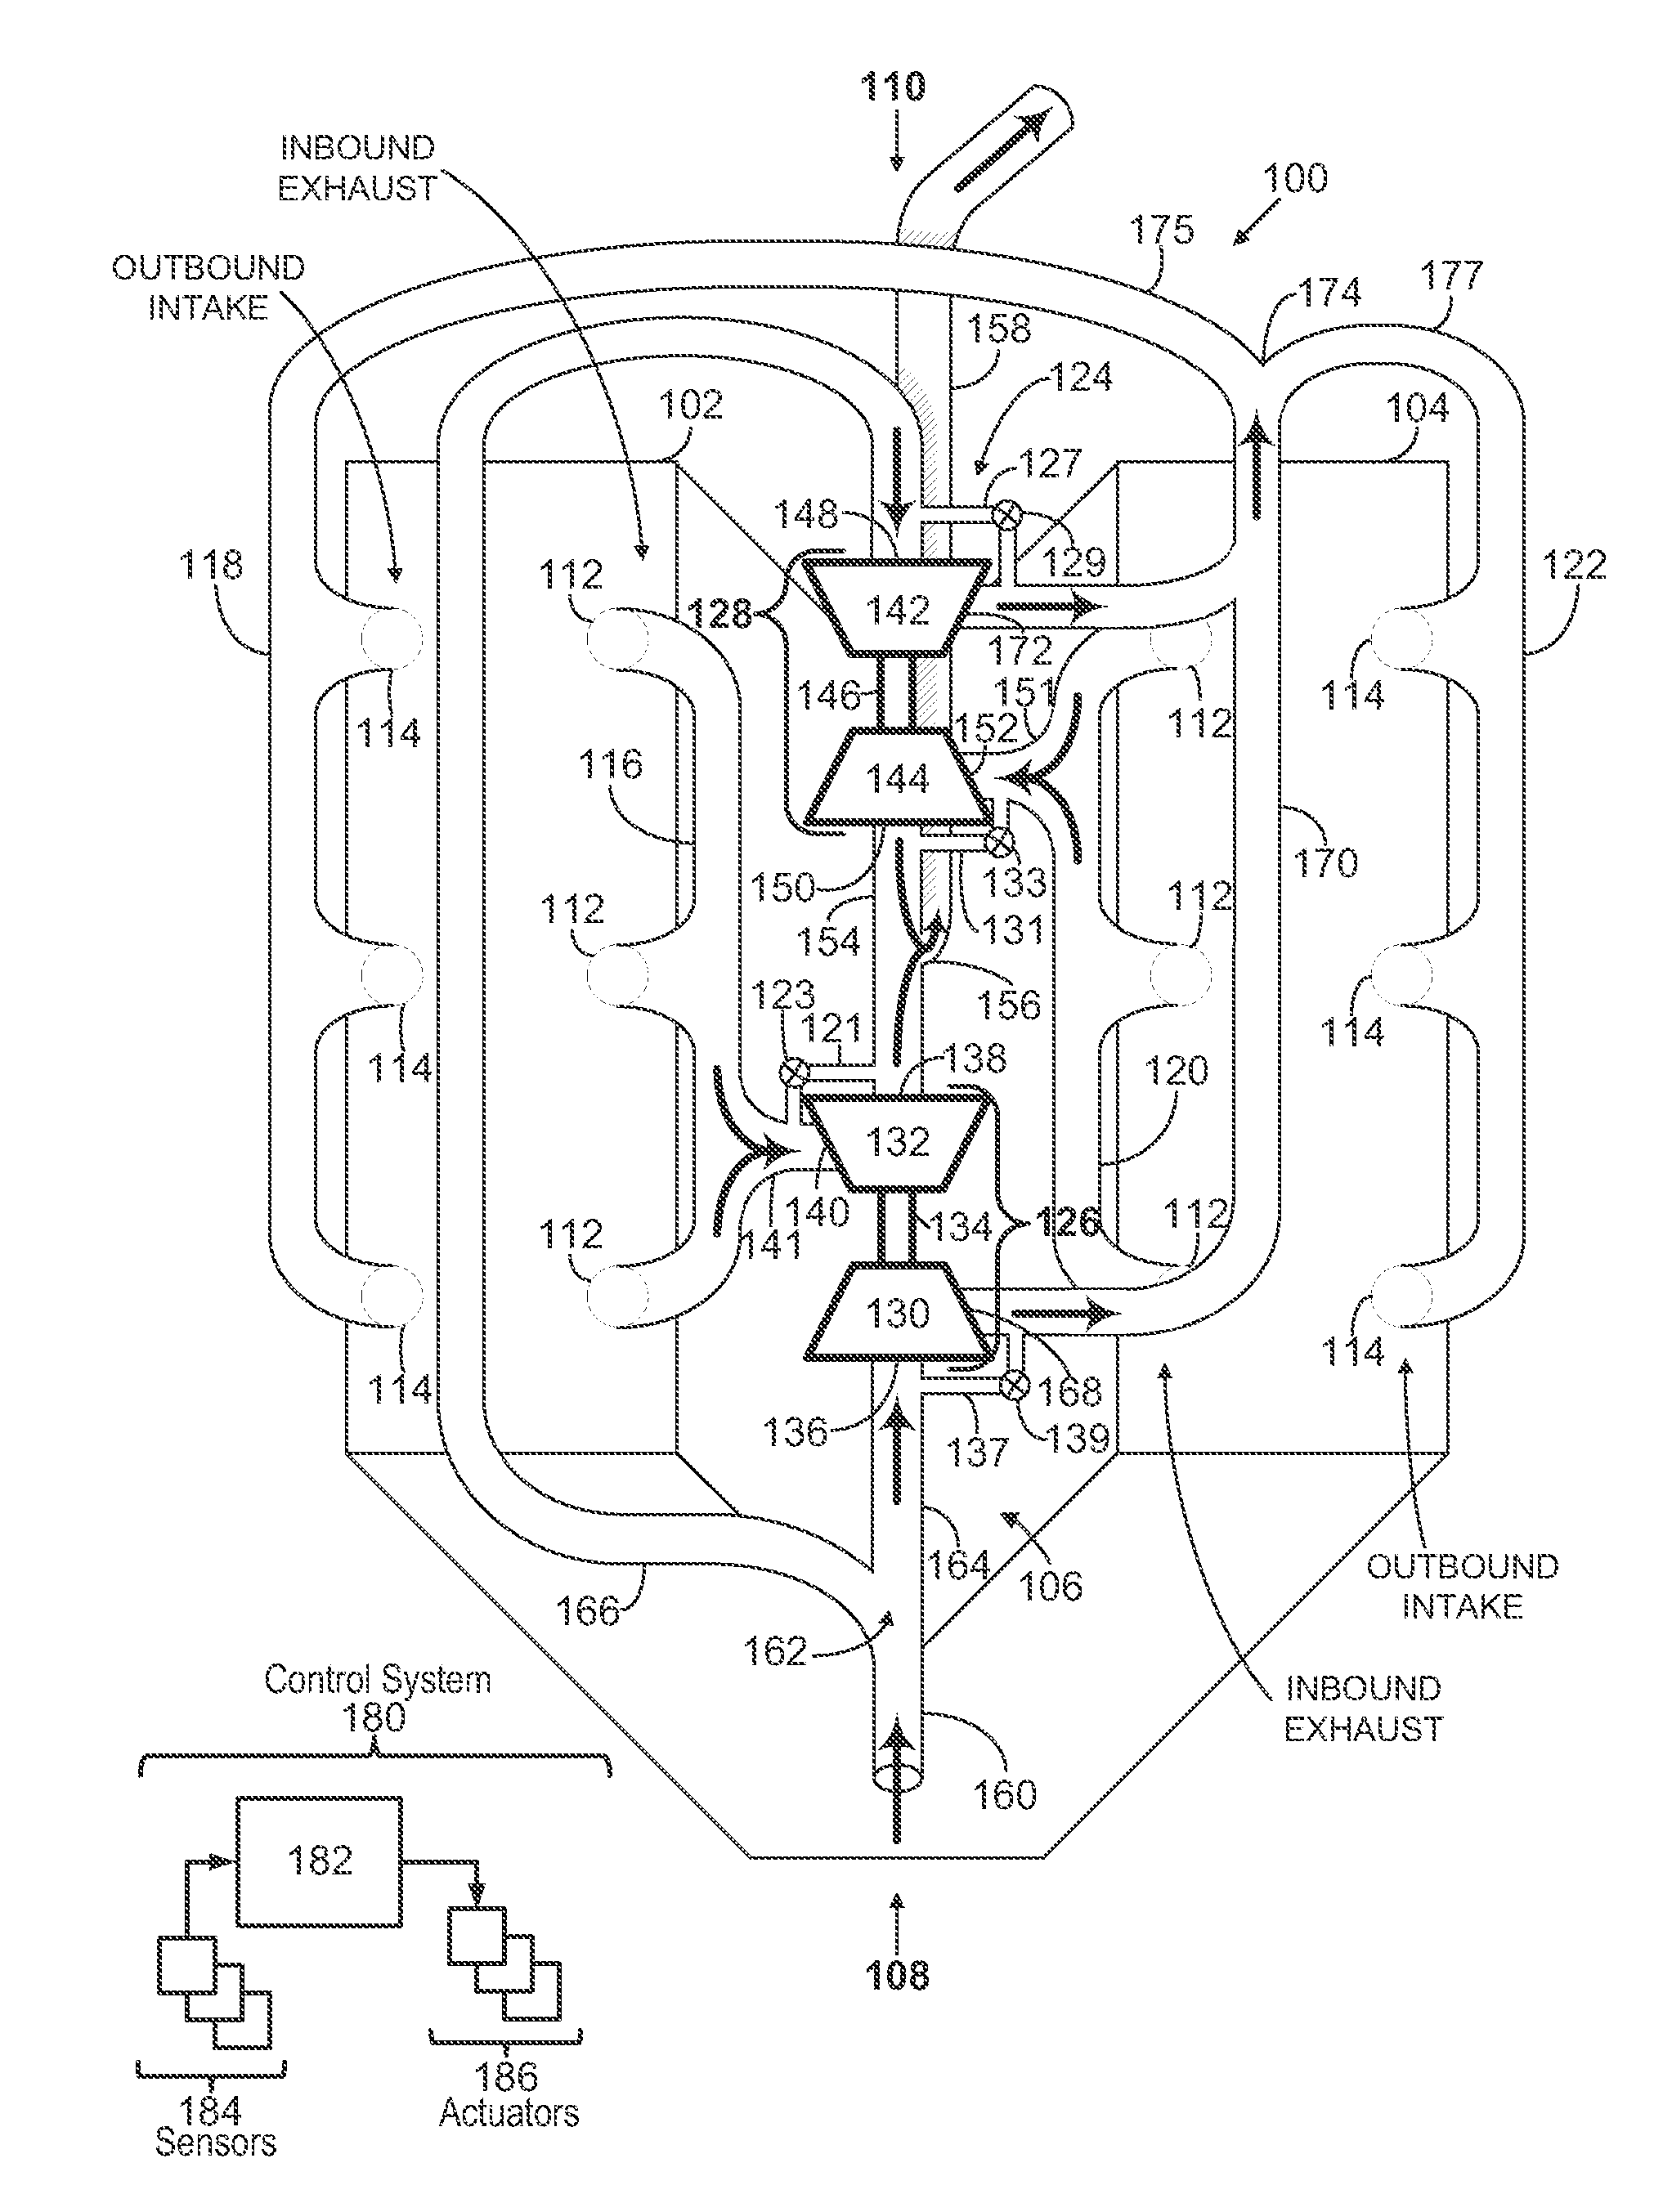 Central turbocharger mounting configuration for a twin-turbo engine